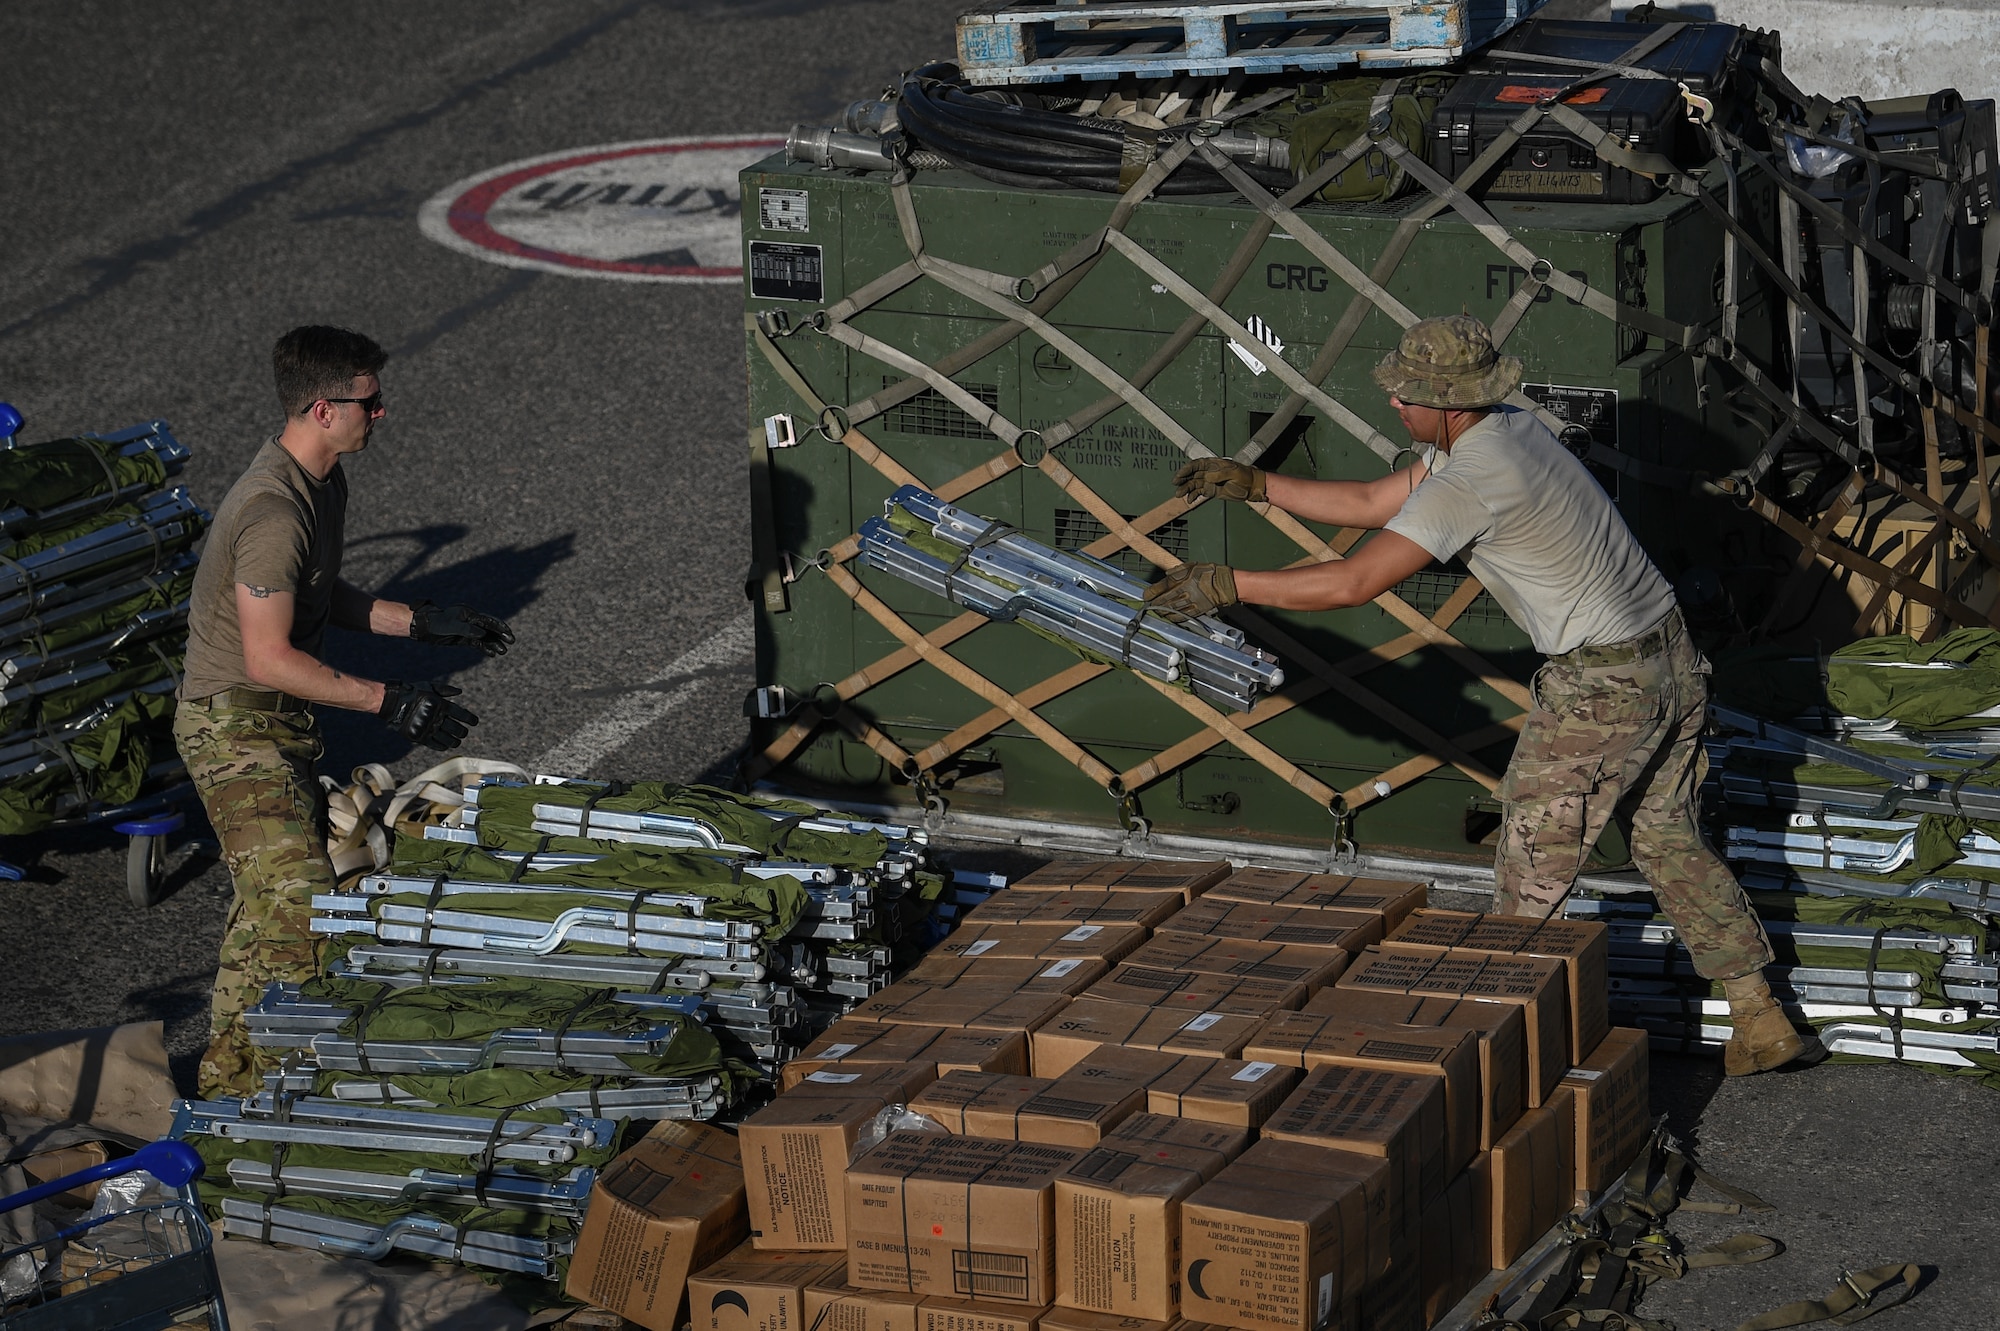 U.S. Airmen assigned to the 435th Contingency Response Group, Ramstein Air Base, Germany, supporting Combined Joint Task Force-Horn of Africa (CJTF-HOA), set up a forward operating location at Beira Airport, Mozambique, April 2, 2019, for the U.S. Department of Defense’s (DoD) relief effort in the Republic of Mozambique and surrounding areas following Cyclone Idai. Teams from CJTF-HOA, which is leading DoD support to relief efforts in Mozambique, began immediate preparation to respond following a call for assistance from the U.S. Agency for International Development’s Disaster Assistance Response Team. (U.S. Air Force photo by Staff Sgt. Corban Lundborg)